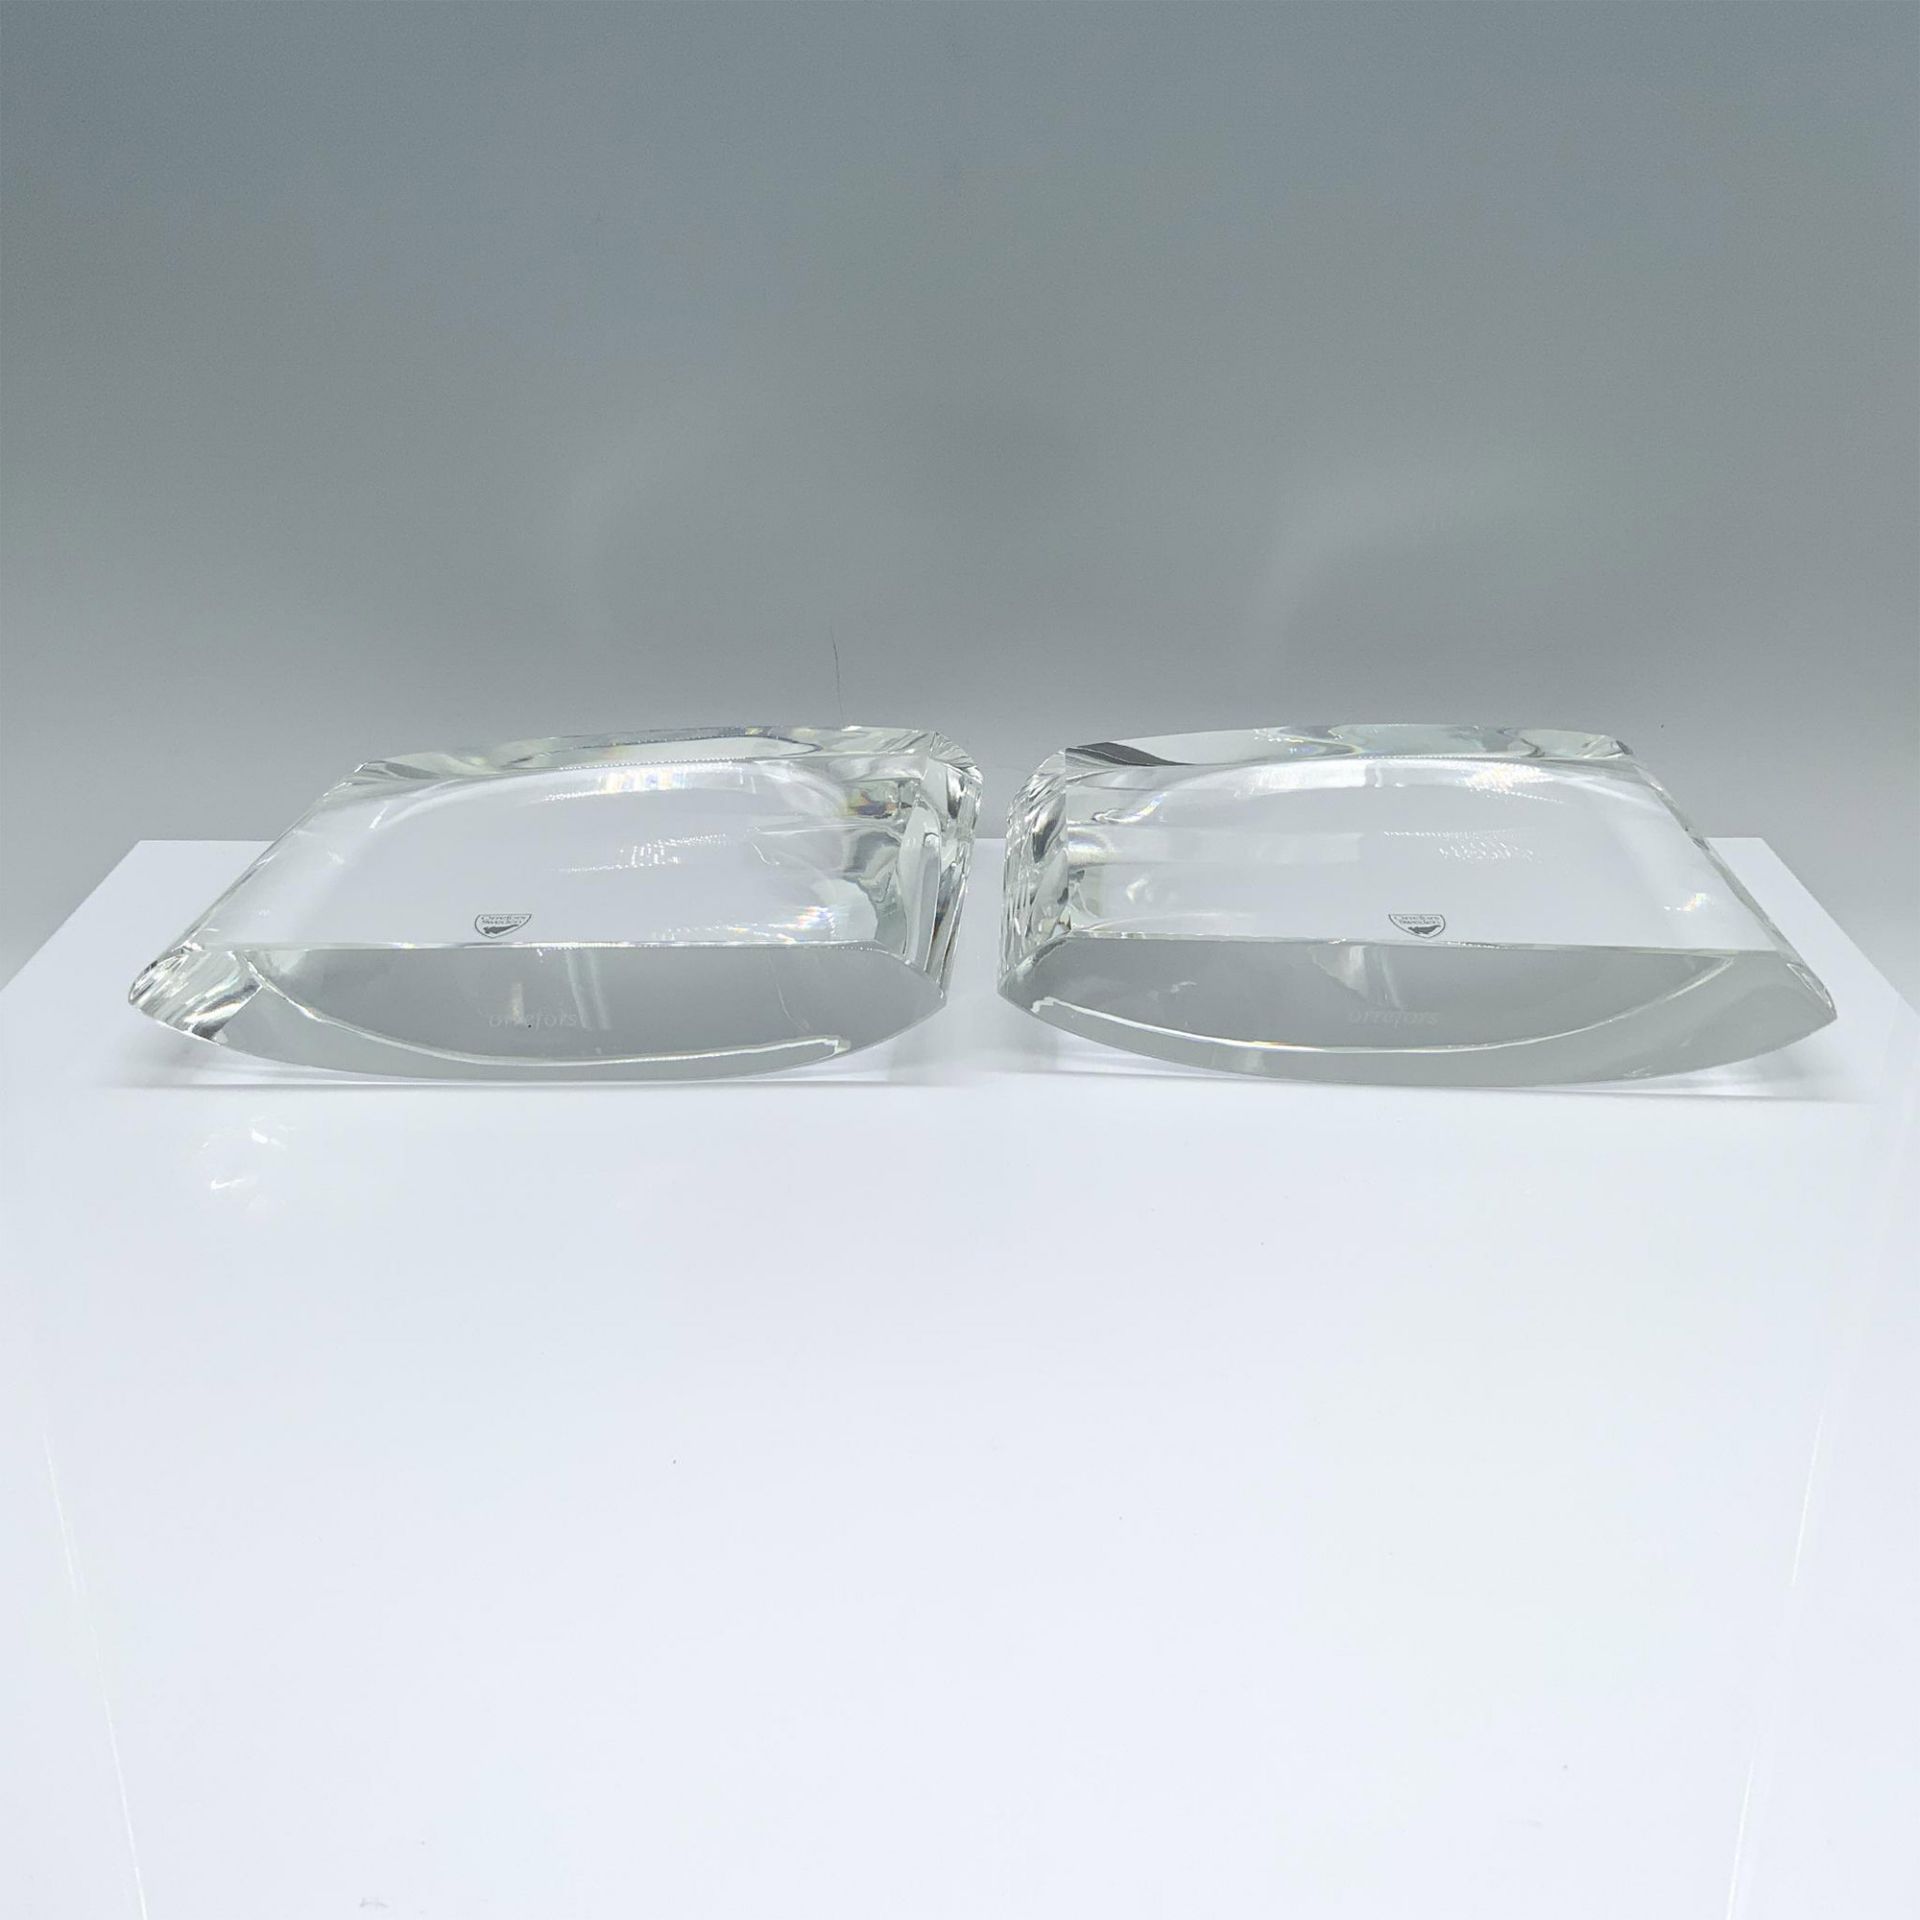 2pc Orrefors Crystal Sculptures - Image 3 of 3